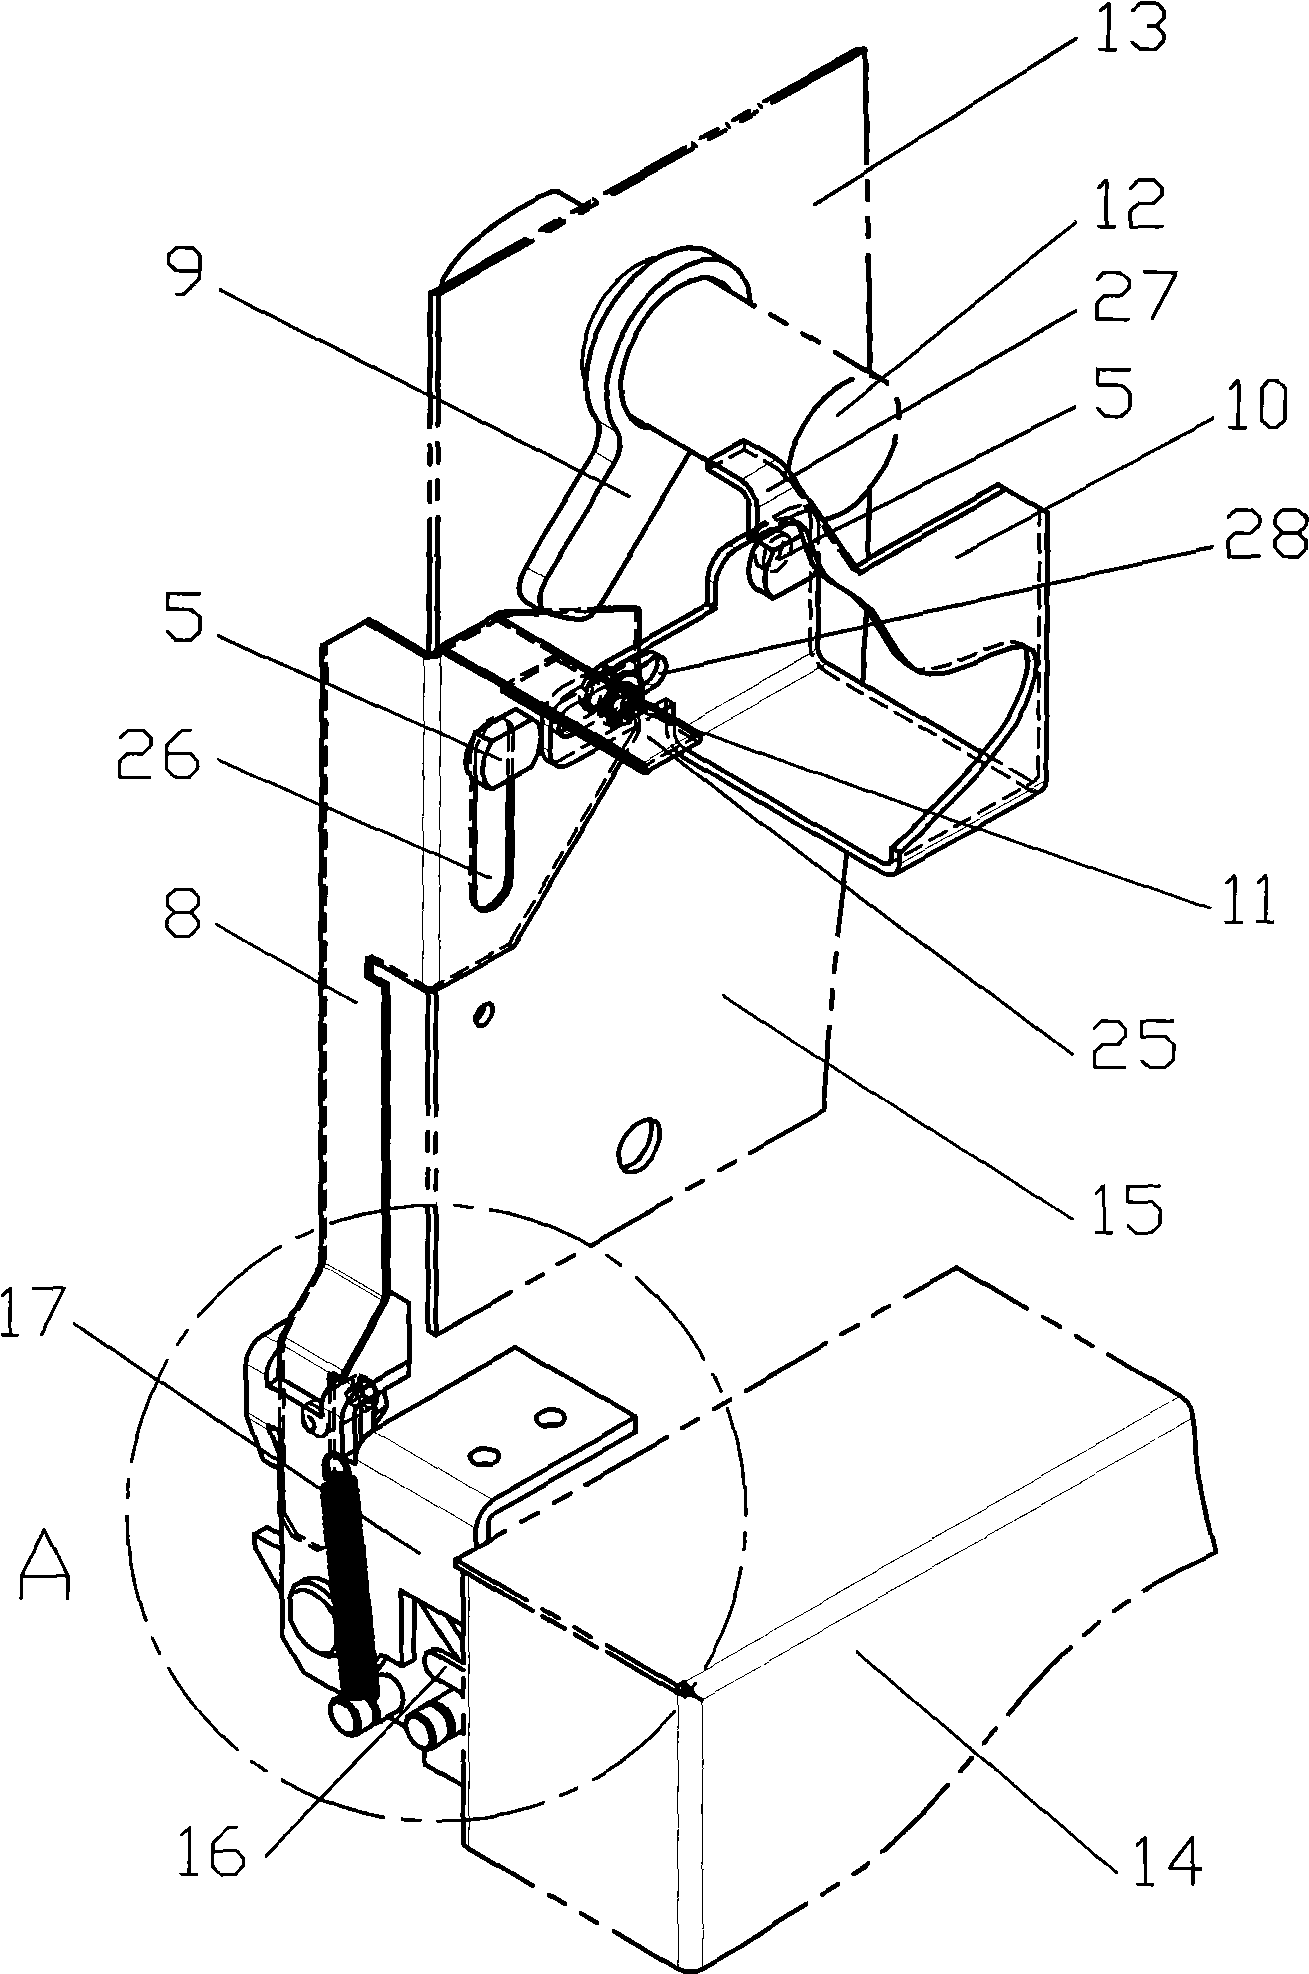 Interlocking device of metal-enclosed switchgear grounding switch and cable room door